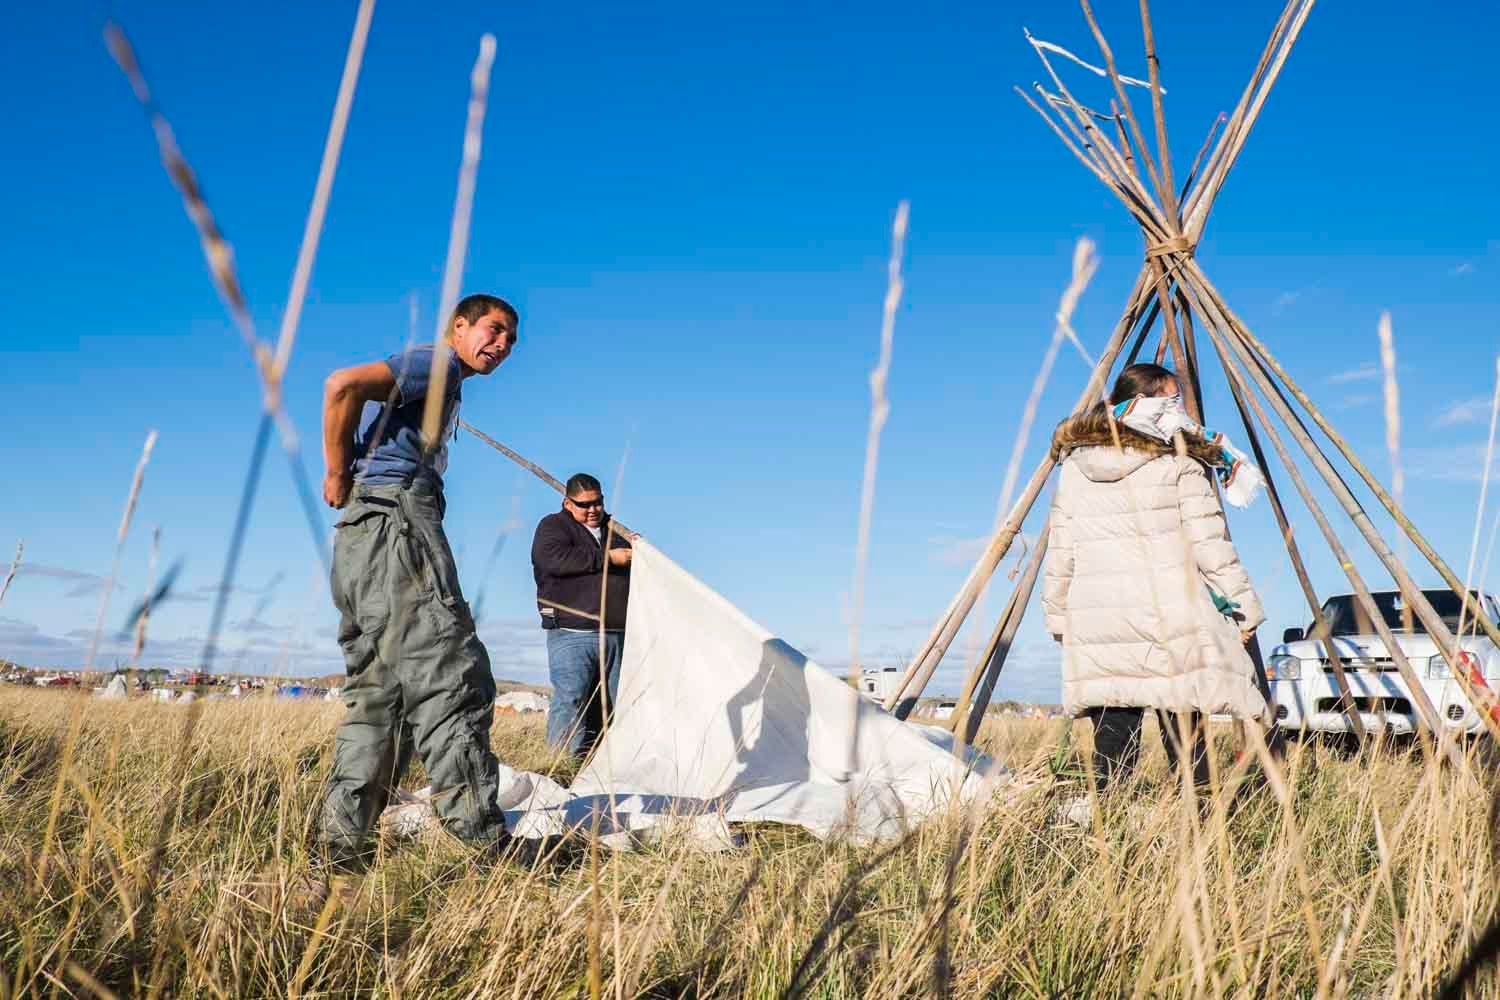 Native Americans from Iowa help build a tepee at the Oceti Sakowin camp. October 7, 2016. Photo by Pat Nabong/MEDILL 